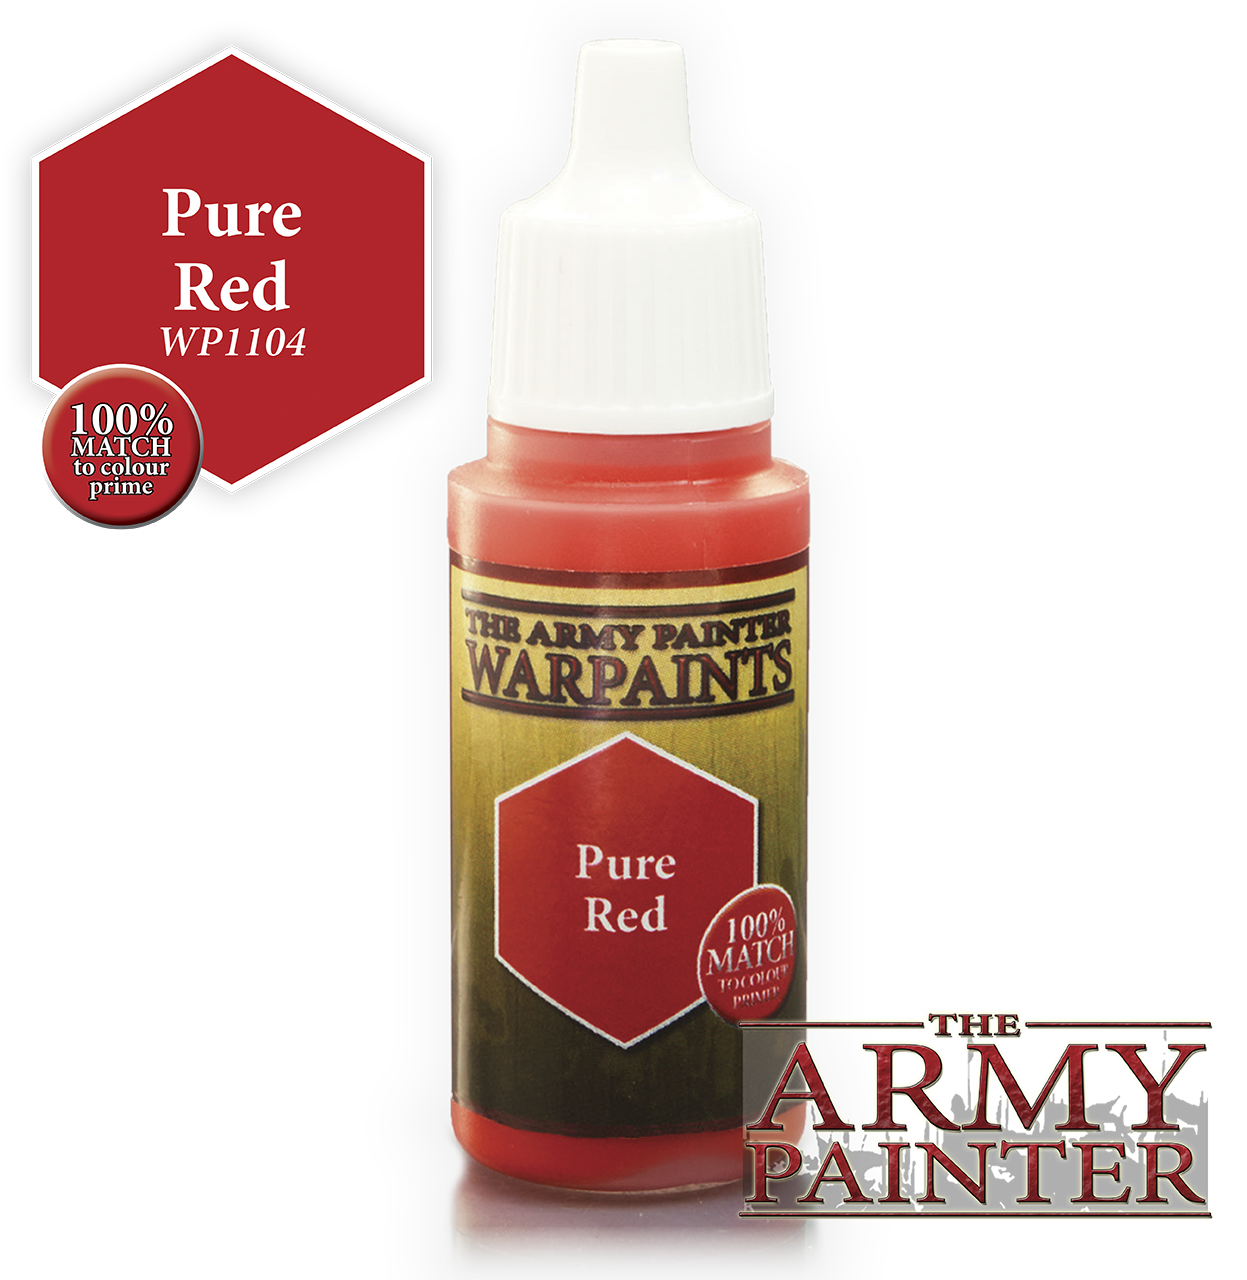 The ARMY PAINTER: Acrylics Warpaint - Pure Red | Tacoma Games